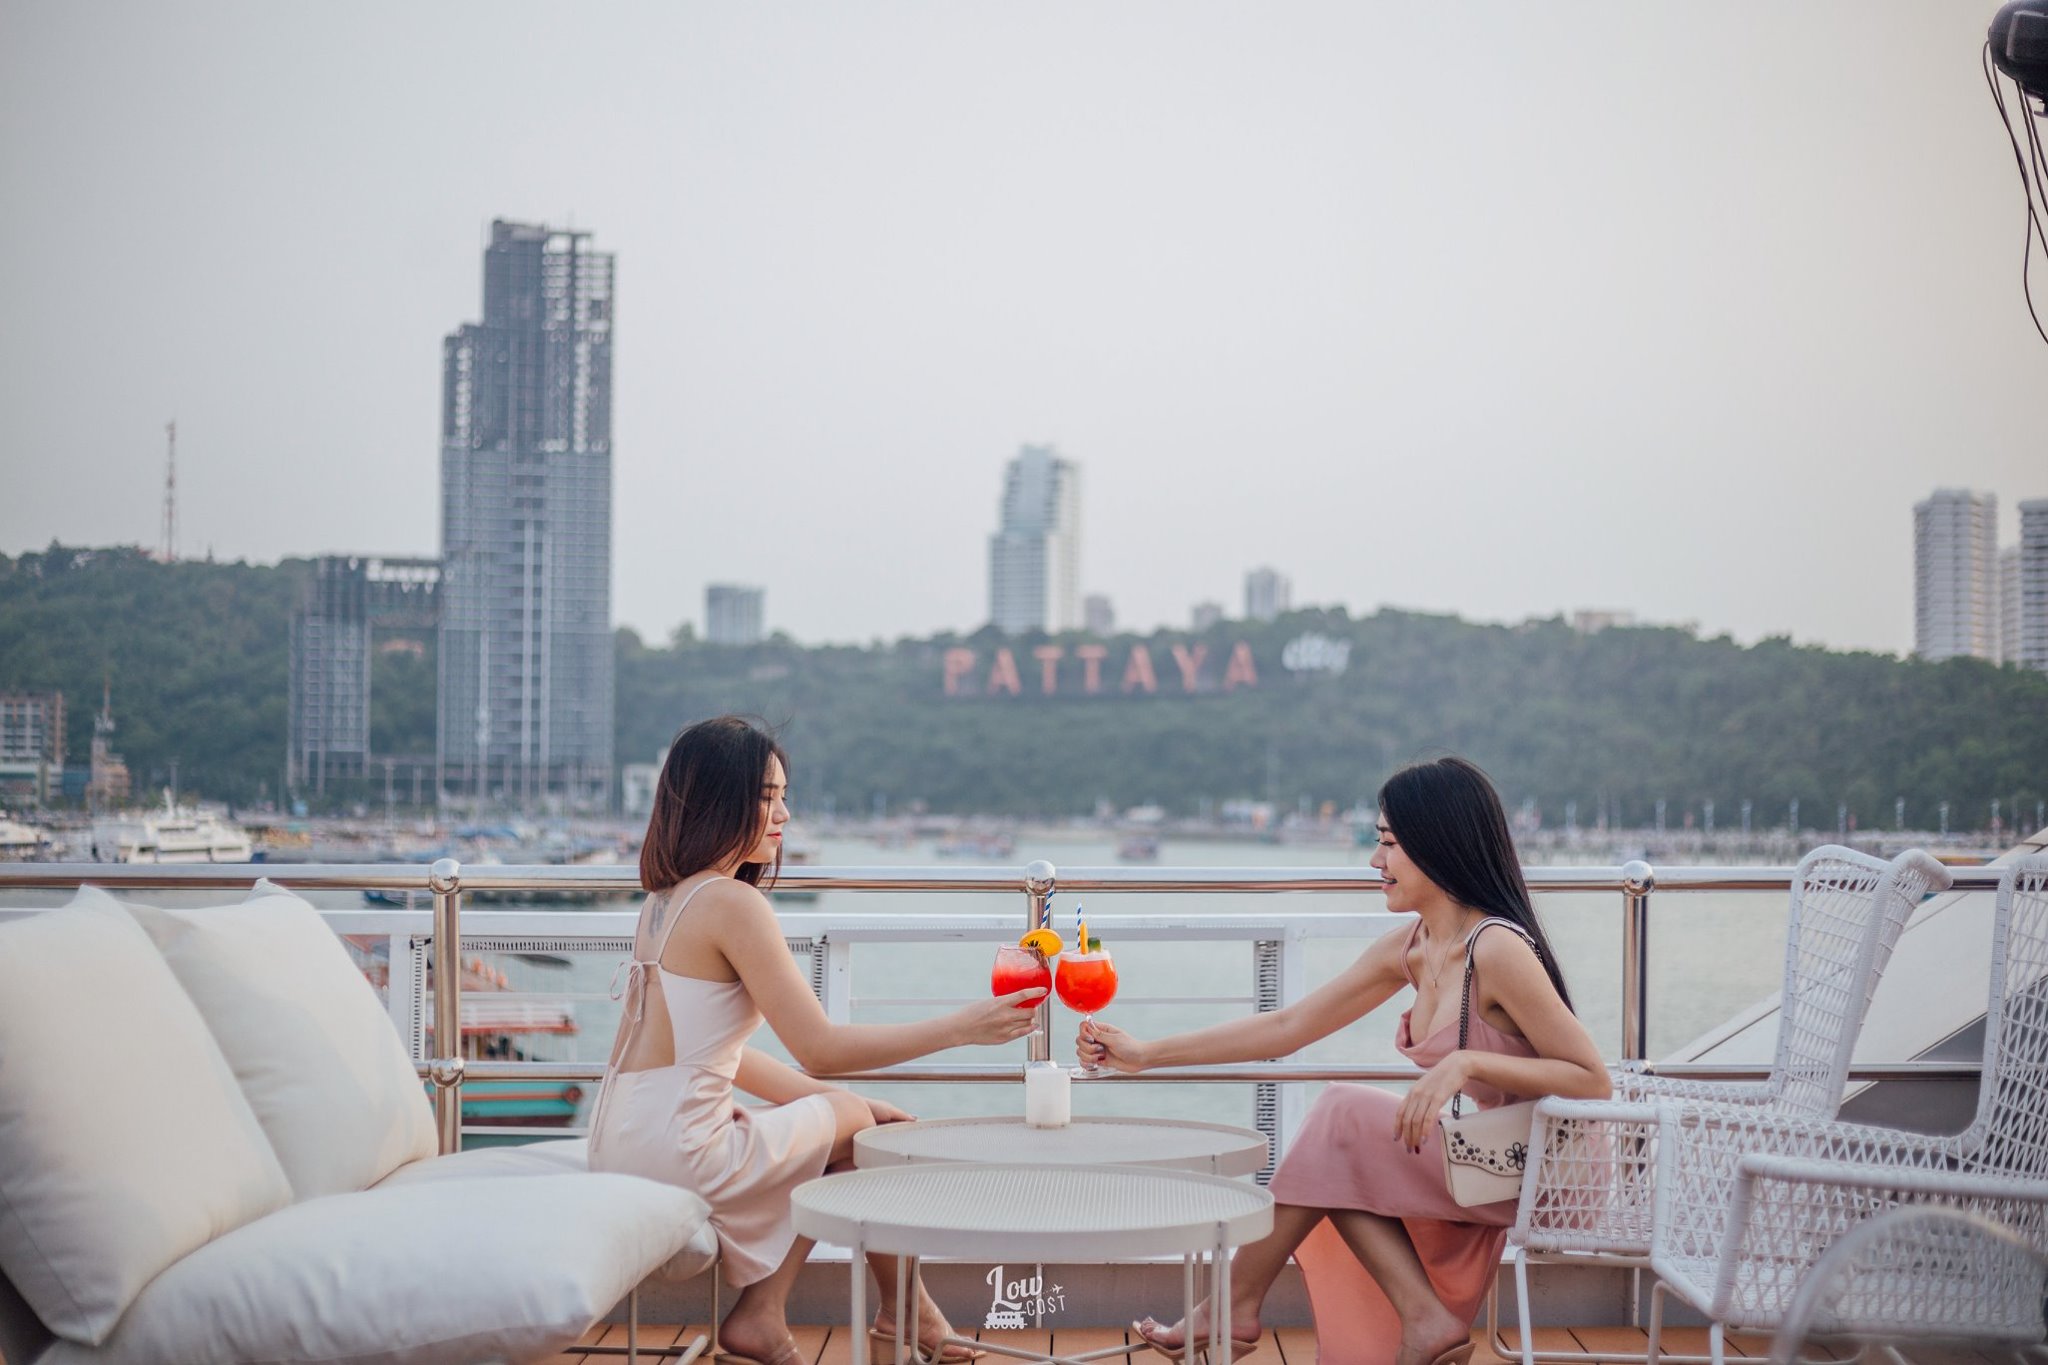 Ocean Sky Pattaya Is A New Rooftop Restaurant On A Cruise With Scenic Views & Affordable Food